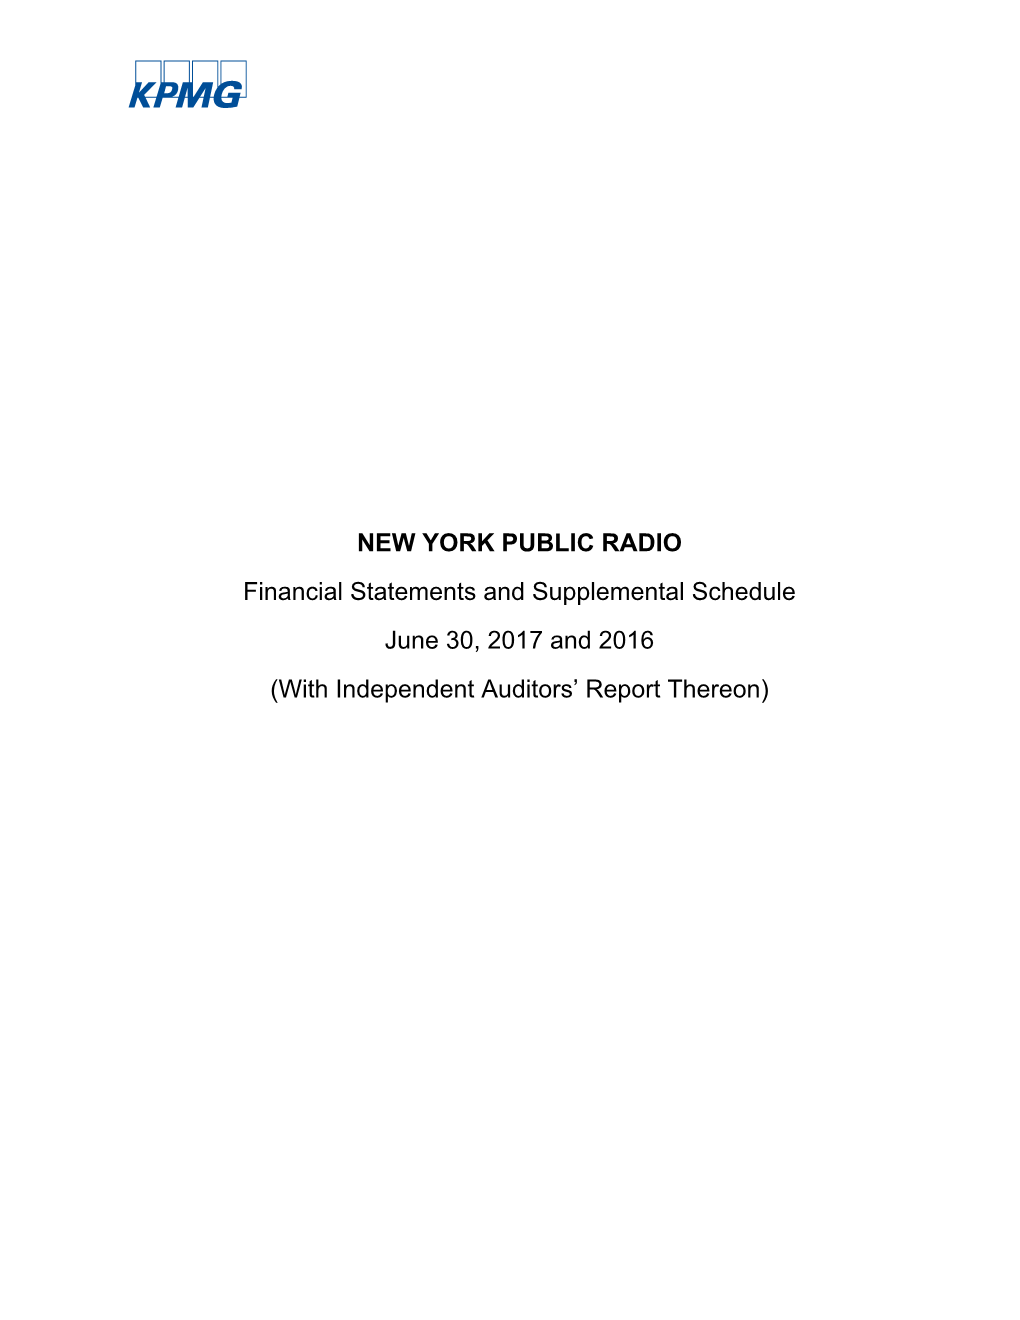 NEW YORK PUBLIC RADIO Financial Statements and Supplemental Schedule June 30, 2017 and 2016 (With Independent Auditors’ Report Thereon)